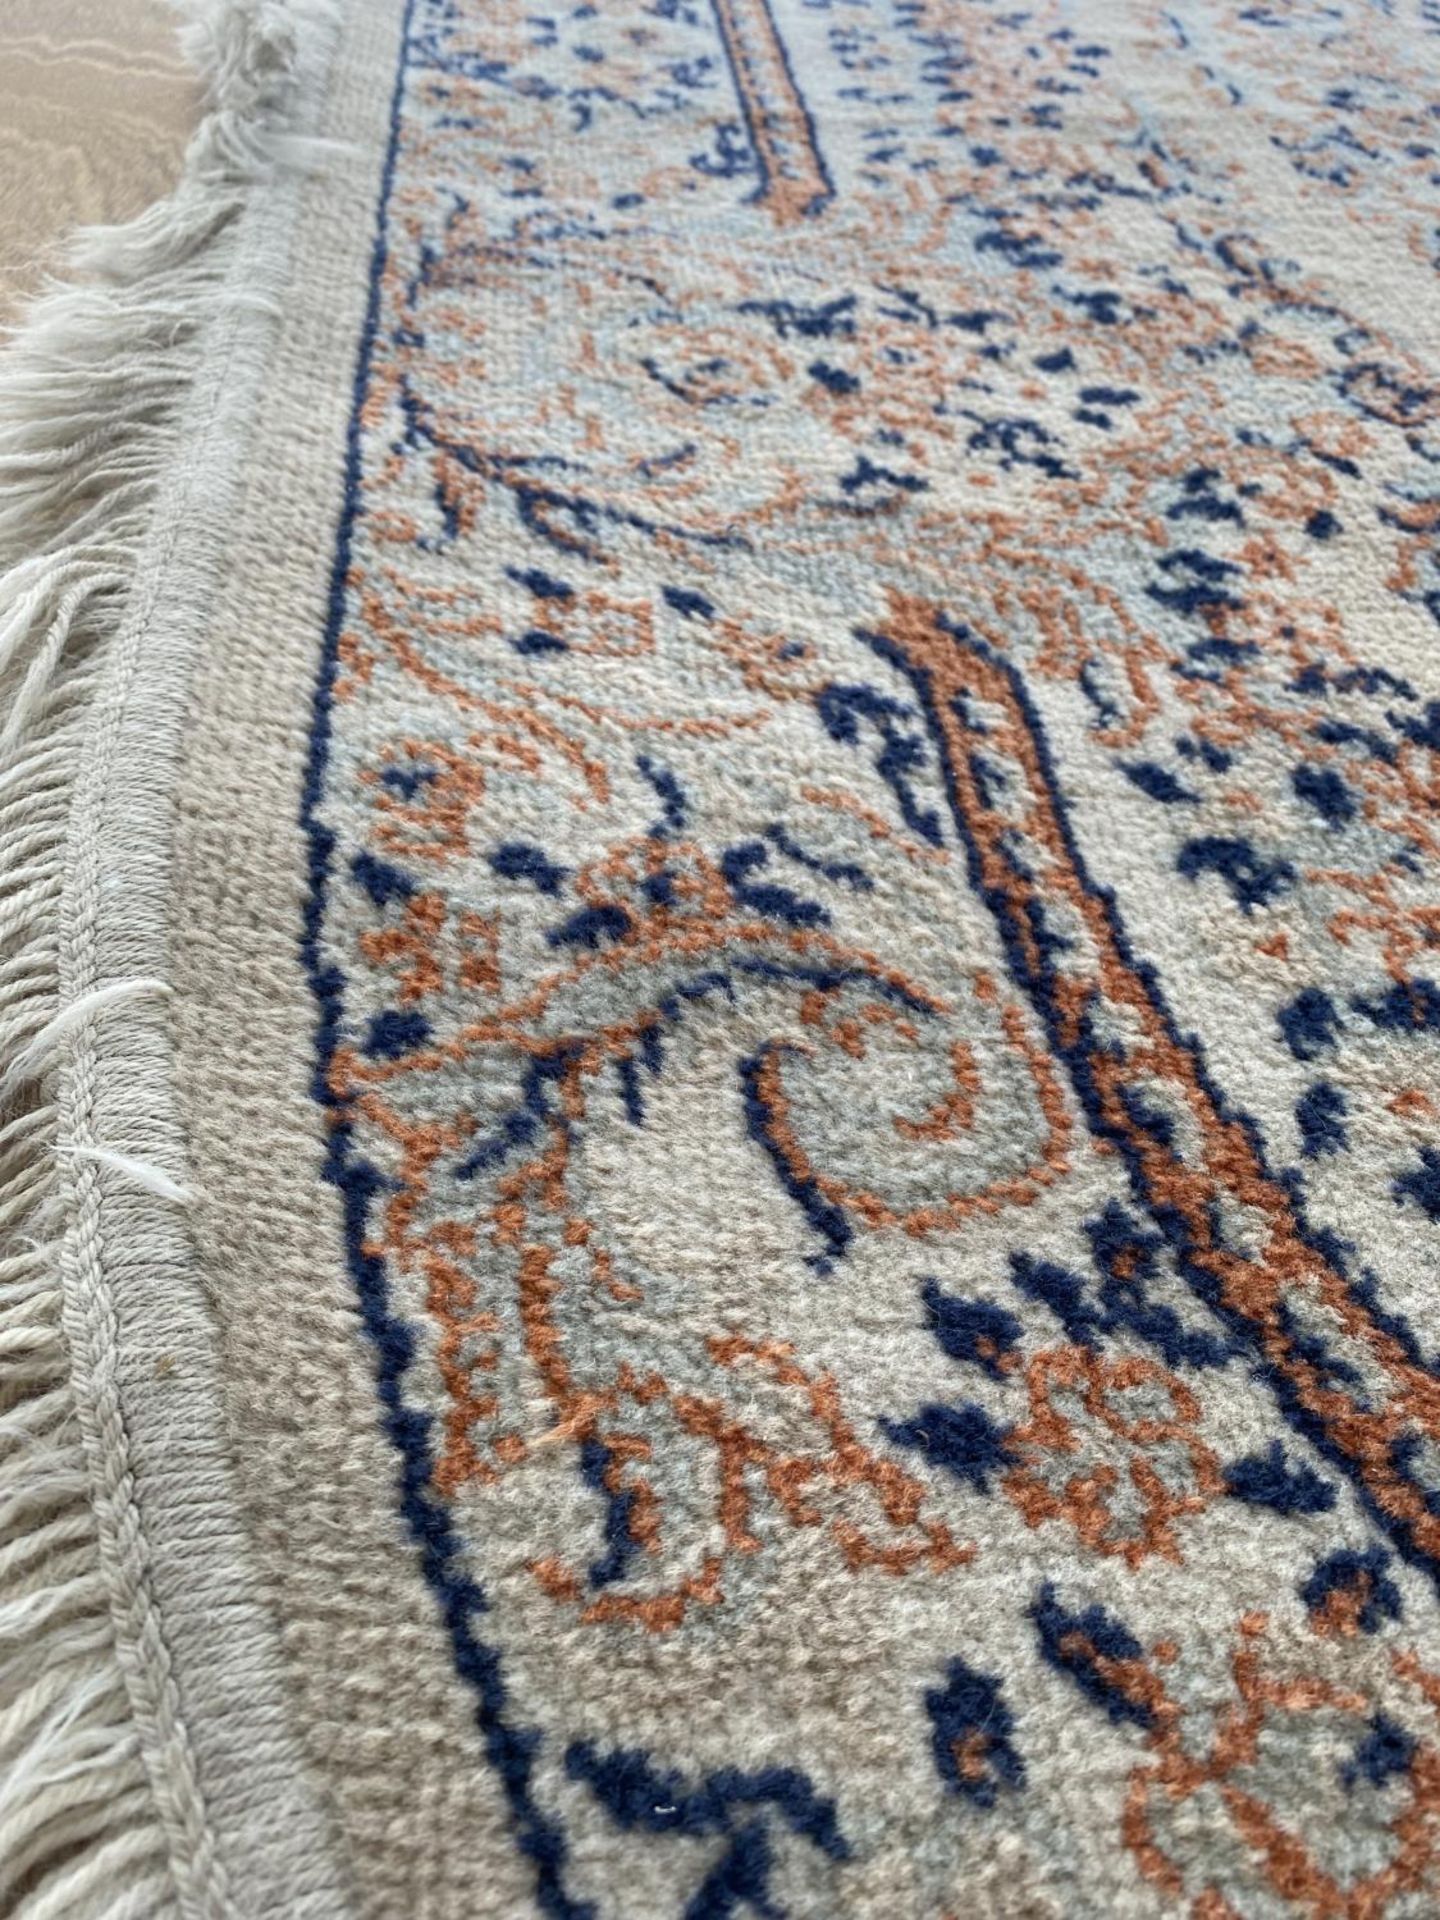 AN OVAL CREAM PATTERNED RUG - Image 3 of 3